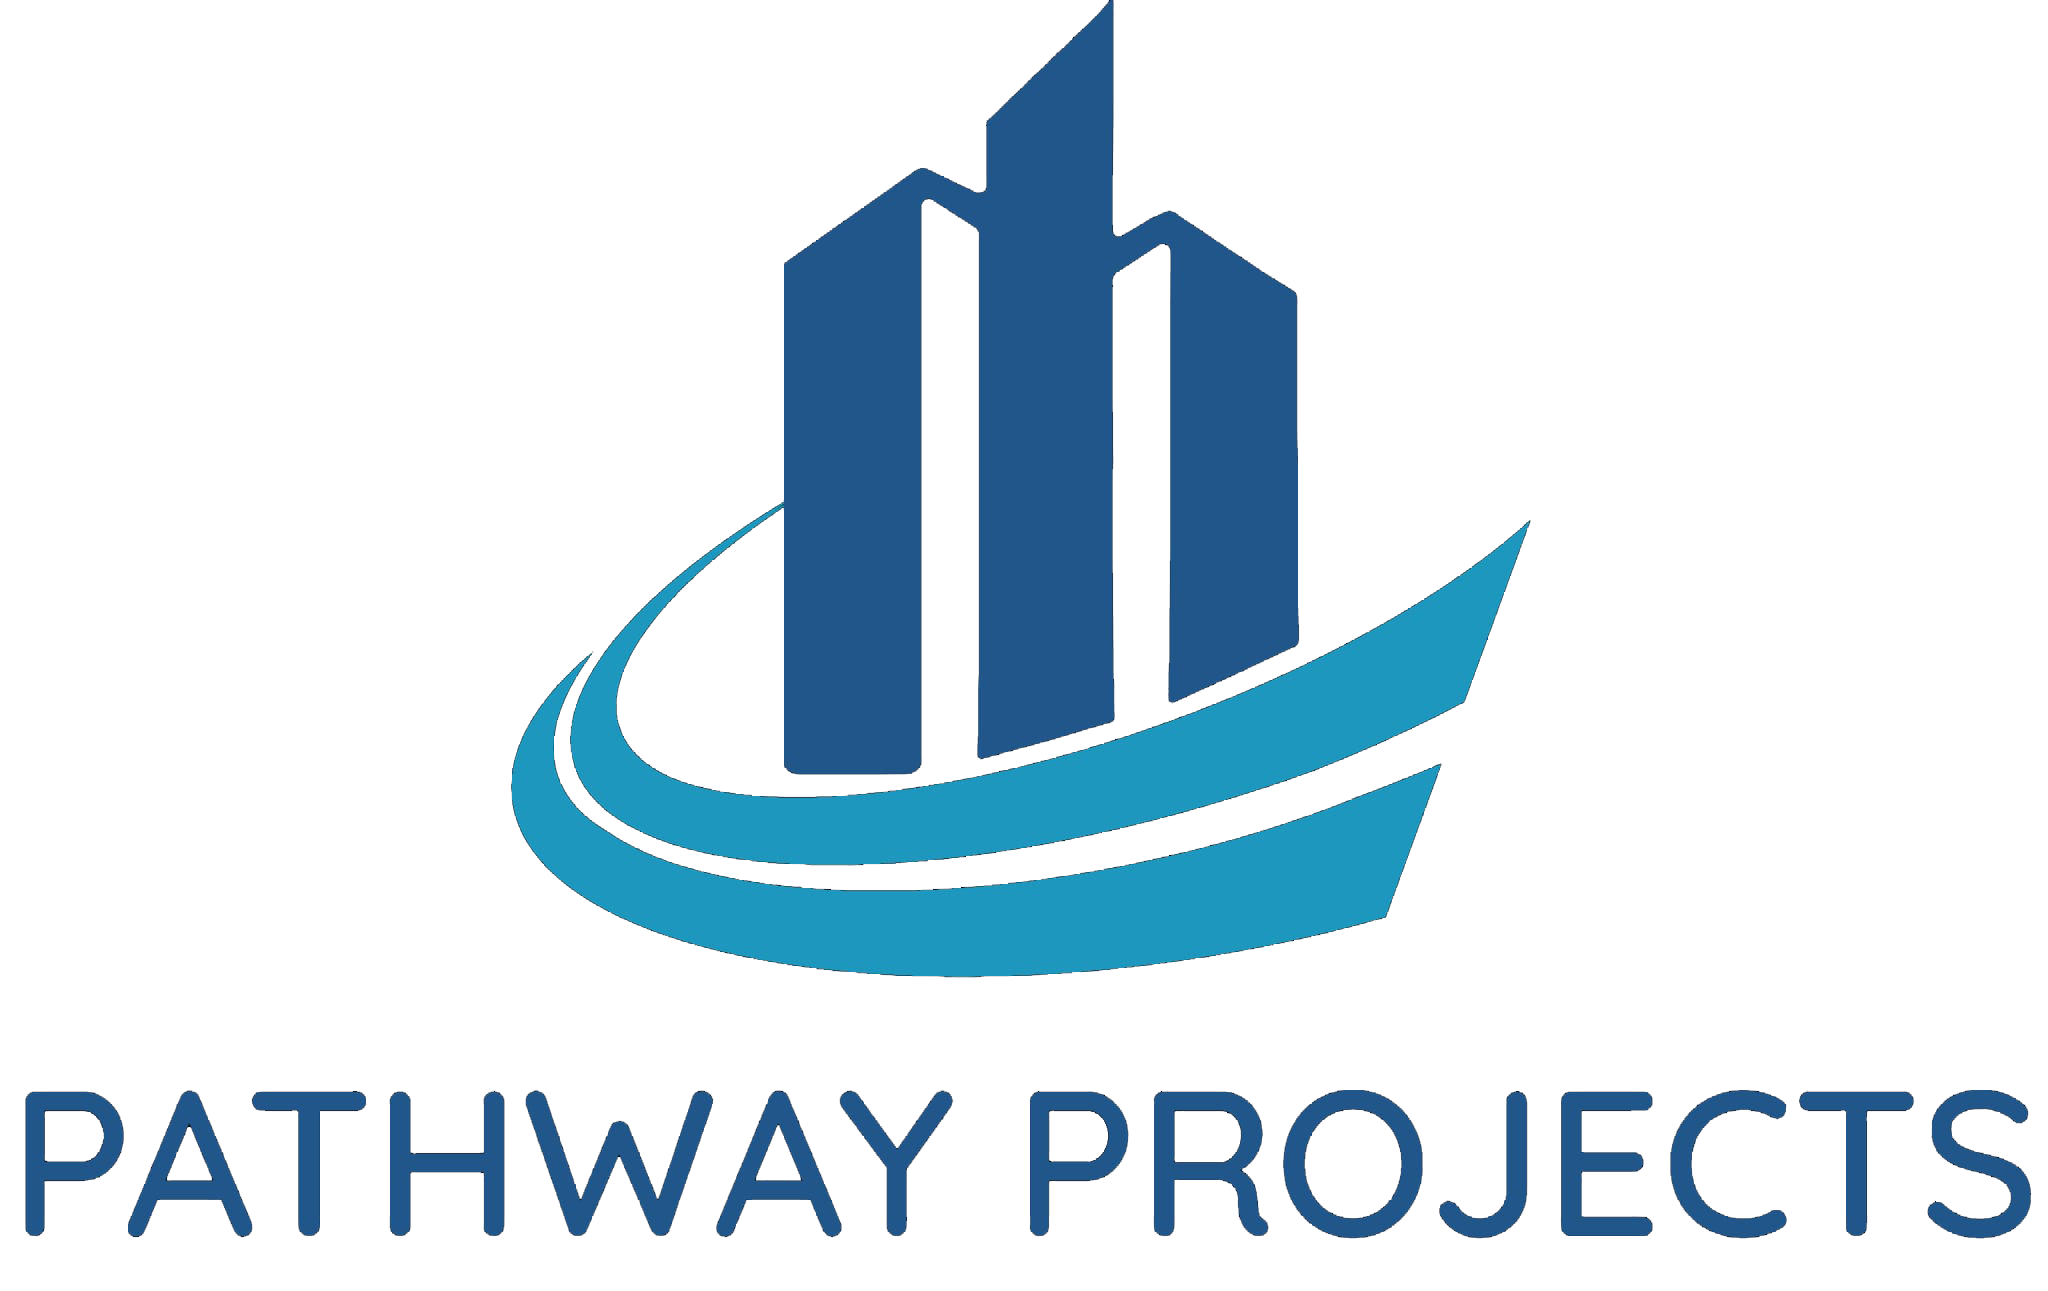 Pathway Projects